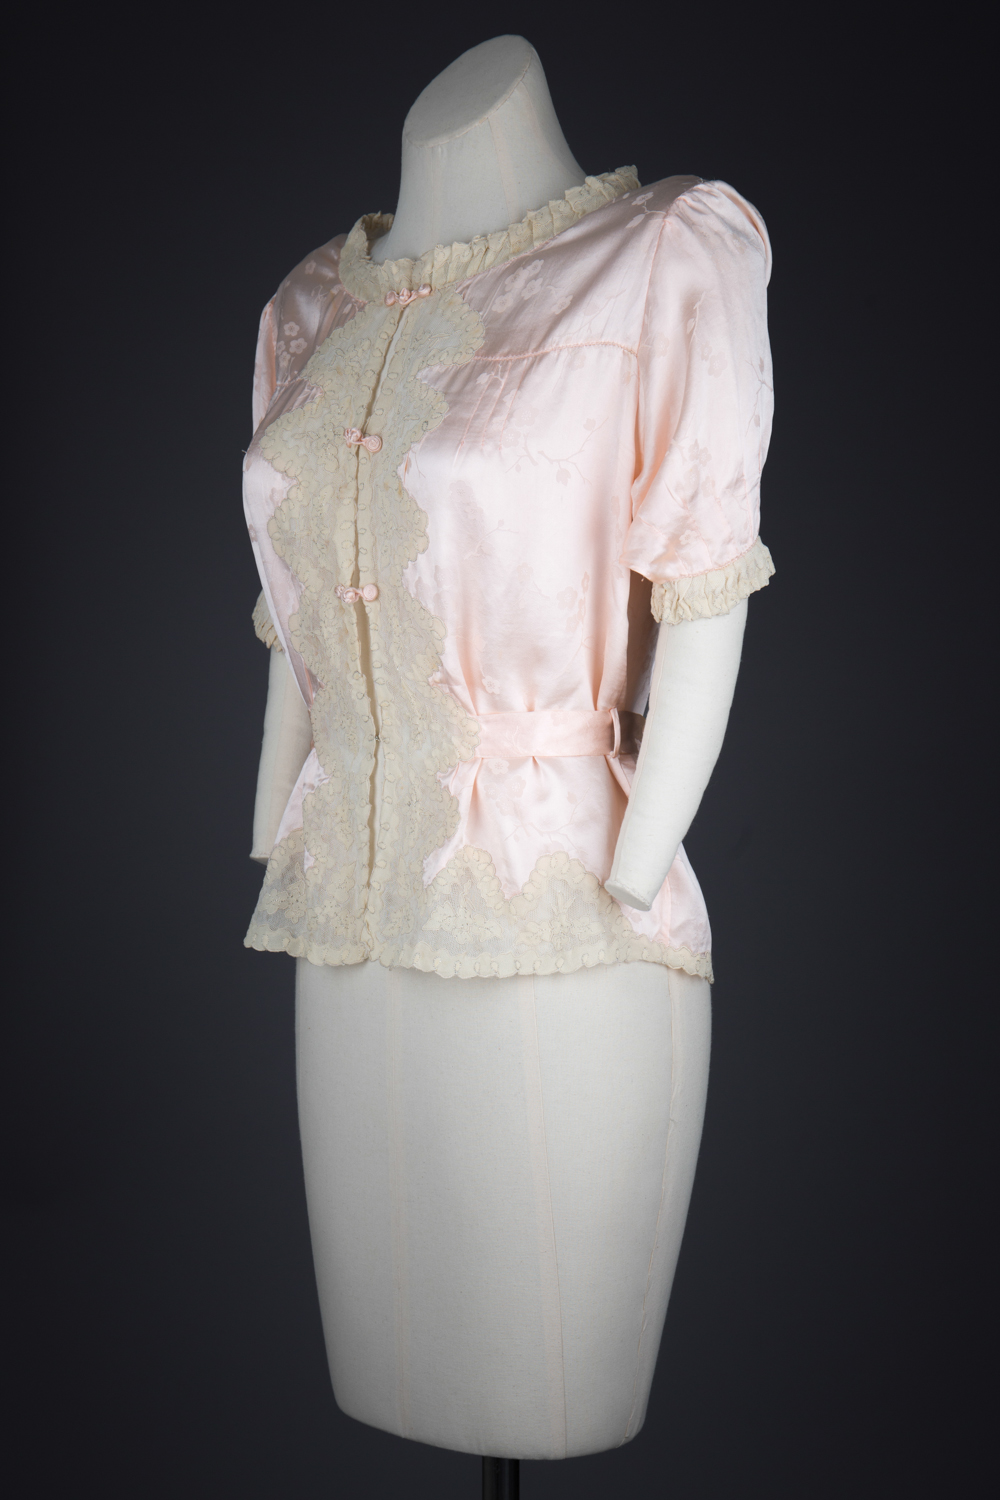 Jacquard Weave Cherry Blossom Silk Bed Jacket With Appliqué & Frog Fastenings, c. 1940s, Made in China for the USA market. The Underpinnings Museum. Photography by Tigz Rice.